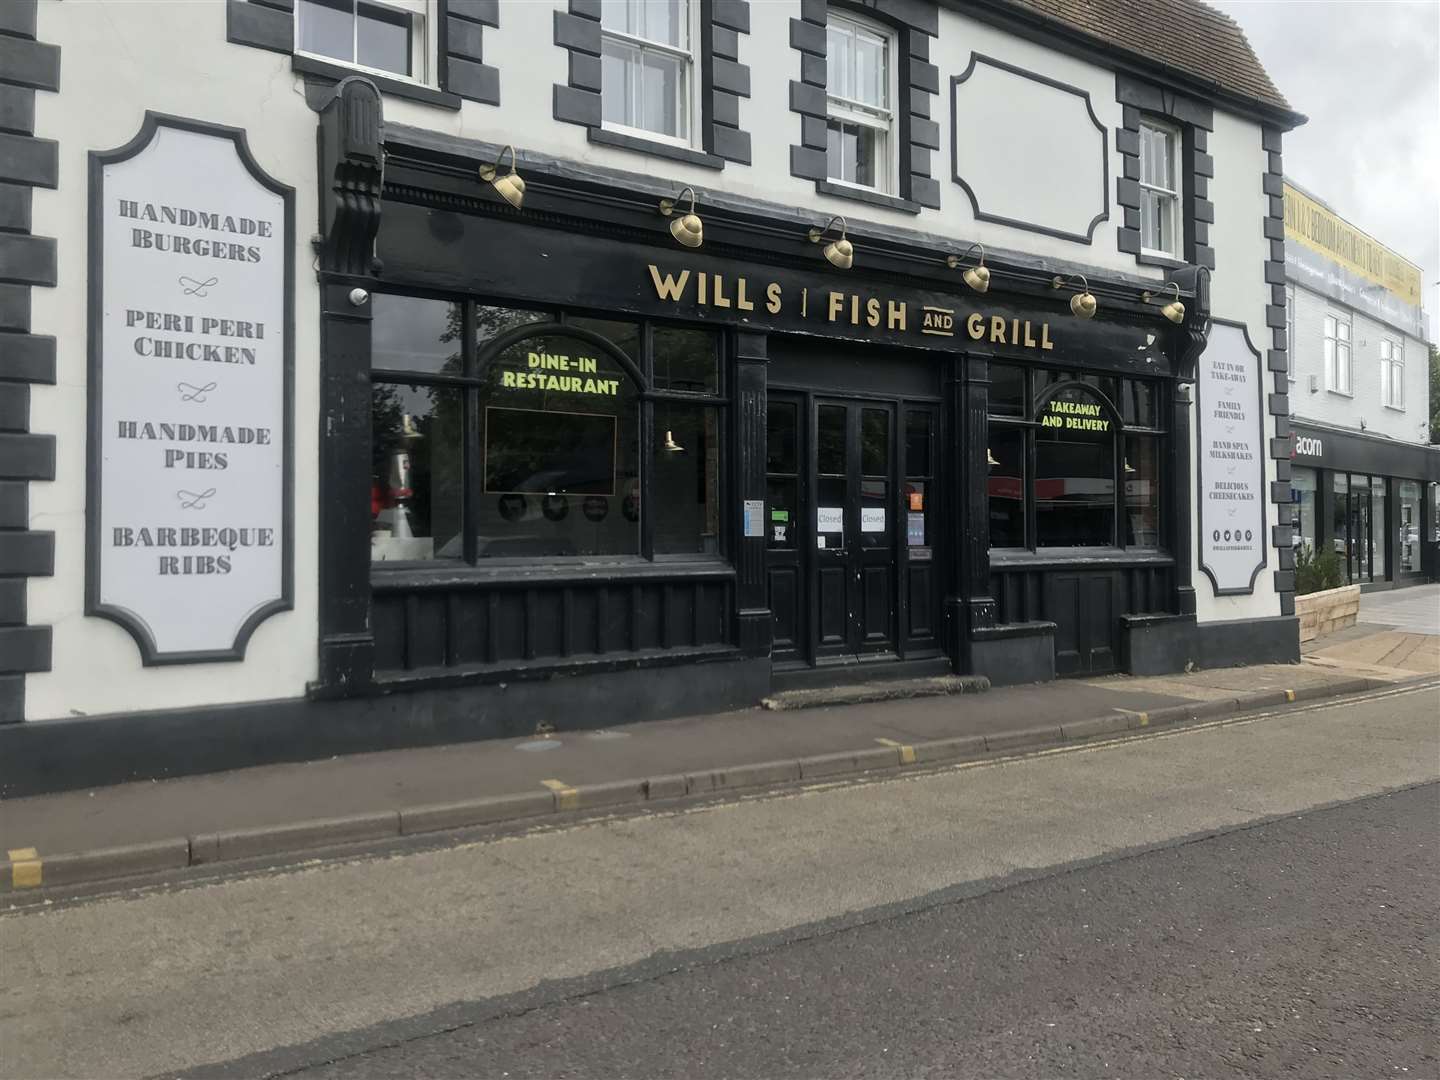 Will's Fish and Grill in Strood